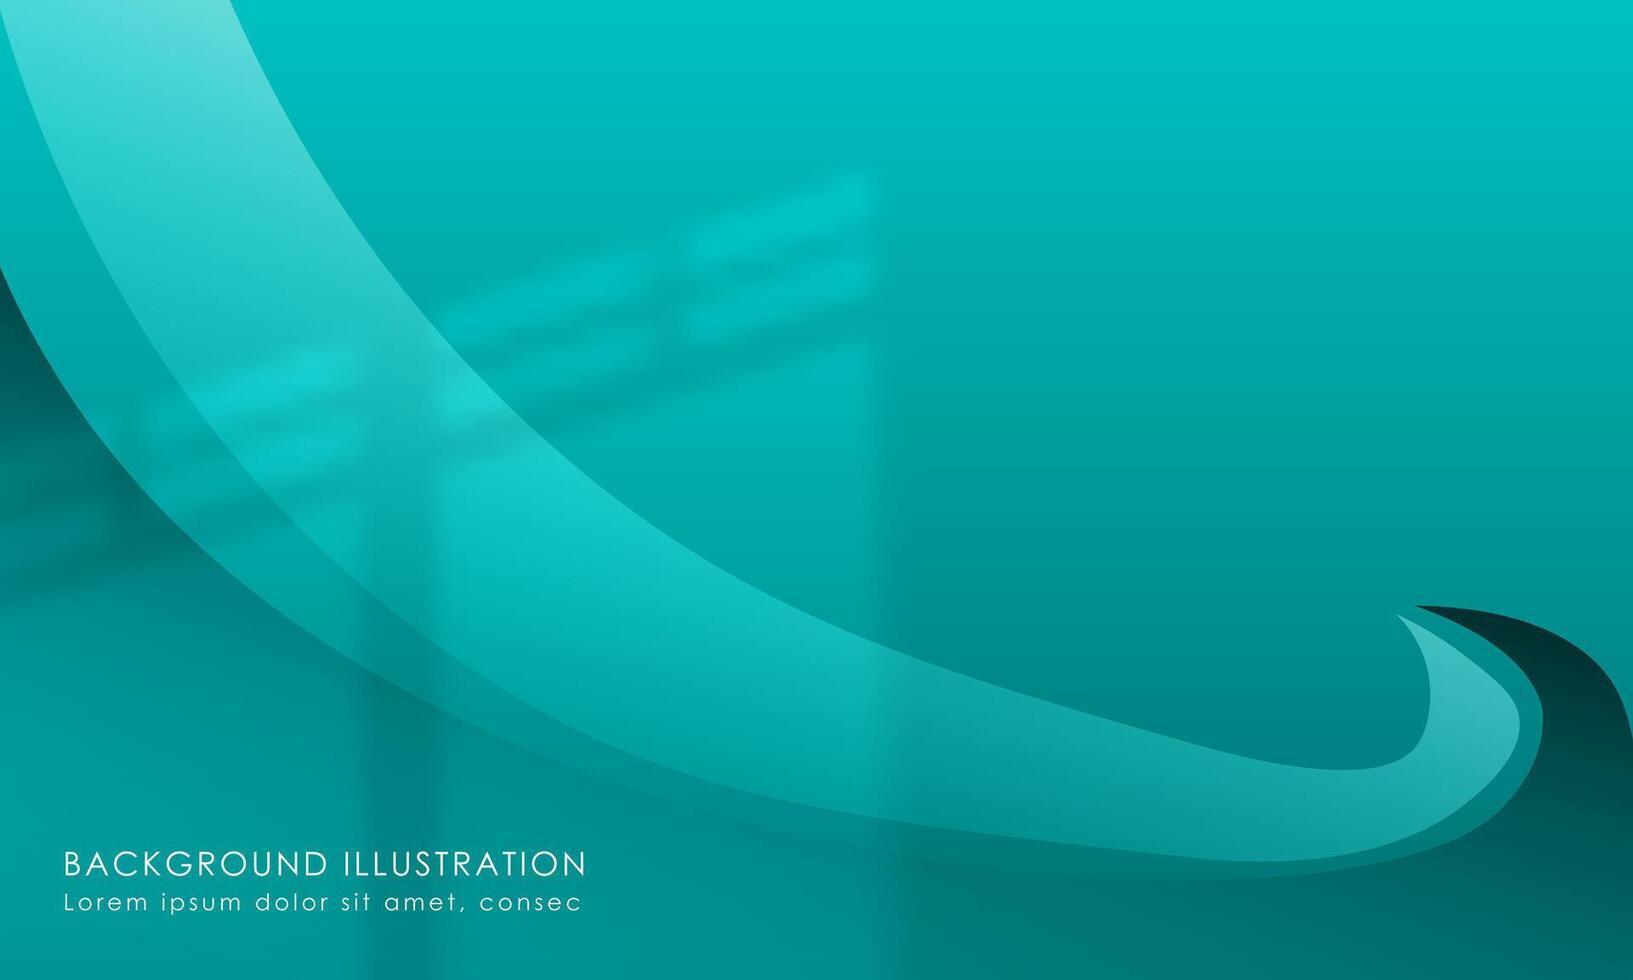 Simple Elegant Gradient Luxury Geometric Abstract Background, For Poster, Banner, Web Design Blue ocean Color EPS 10 vector